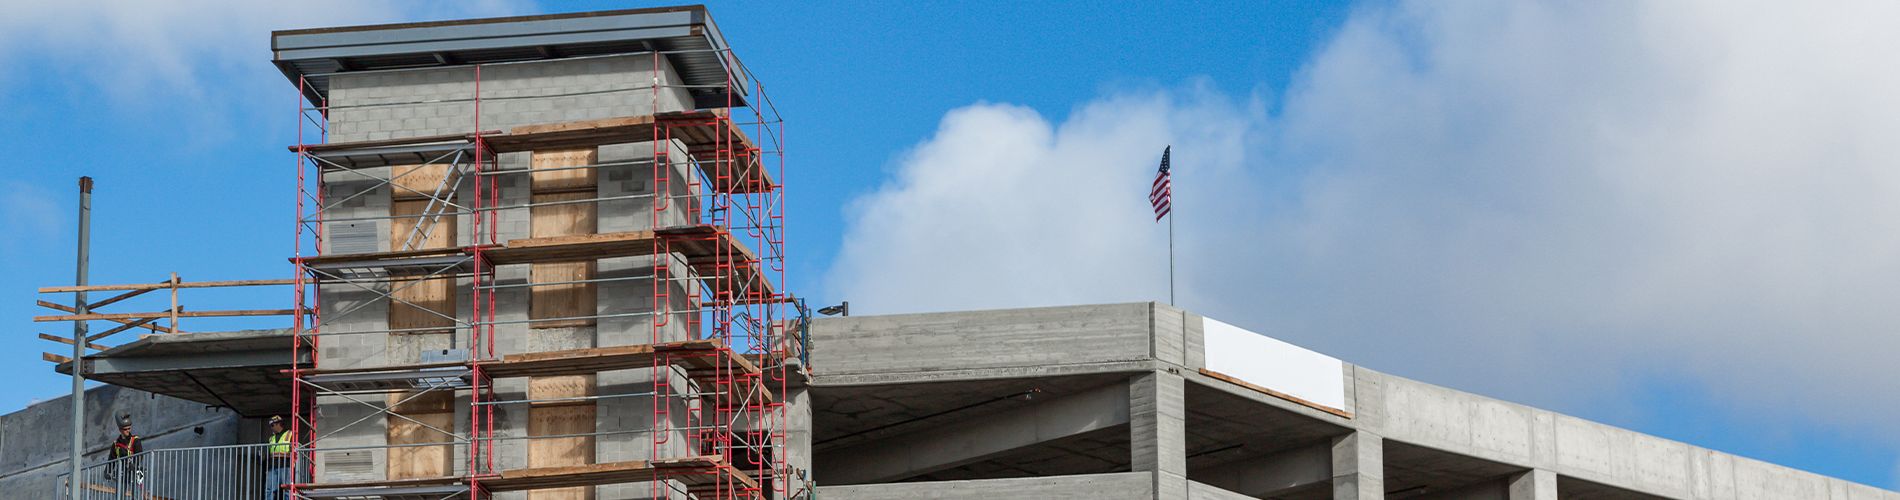 A picture of a parking garage under construction and an American Flag on top.